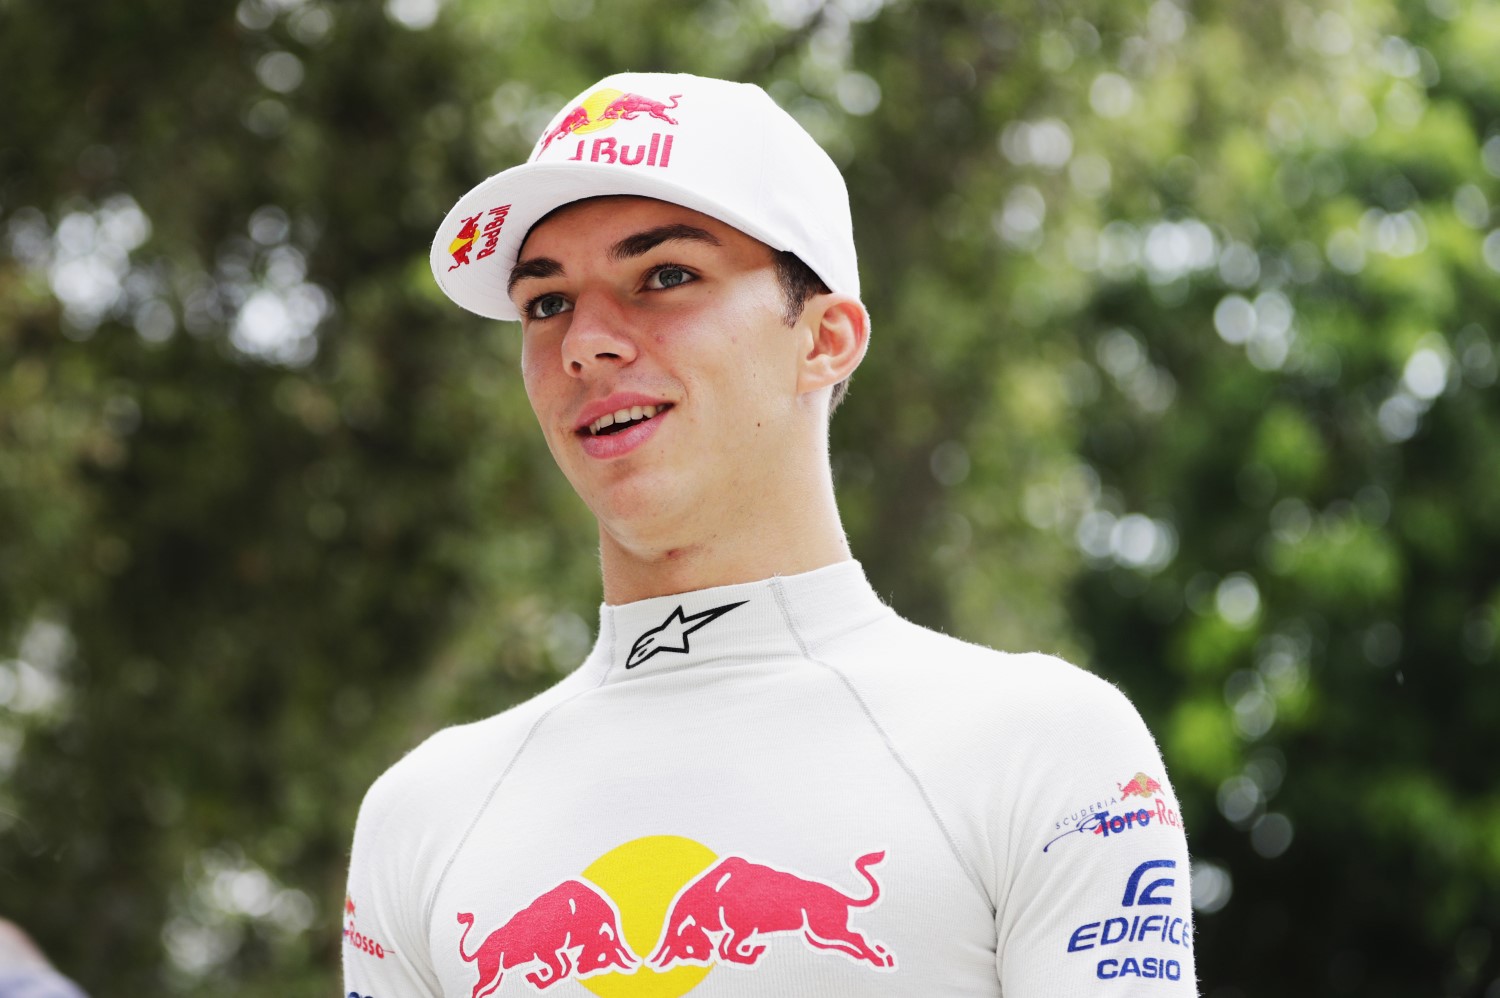 Pierre Gasly outqualified his hapless teammate in his very first F1 start